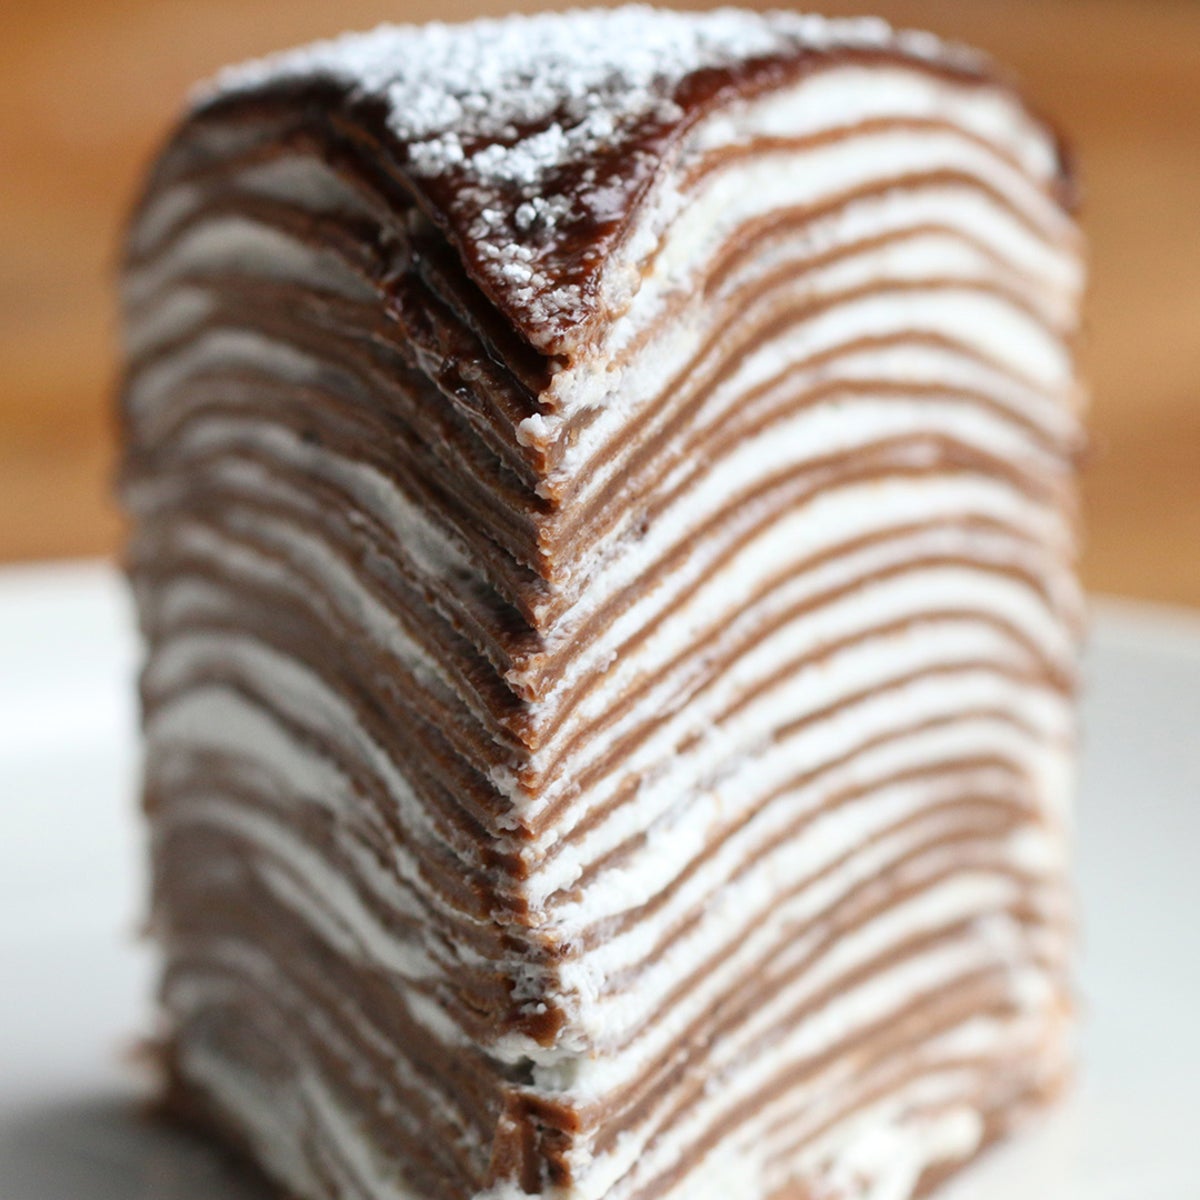 Mille Crepe Cake Recipe by Tasty